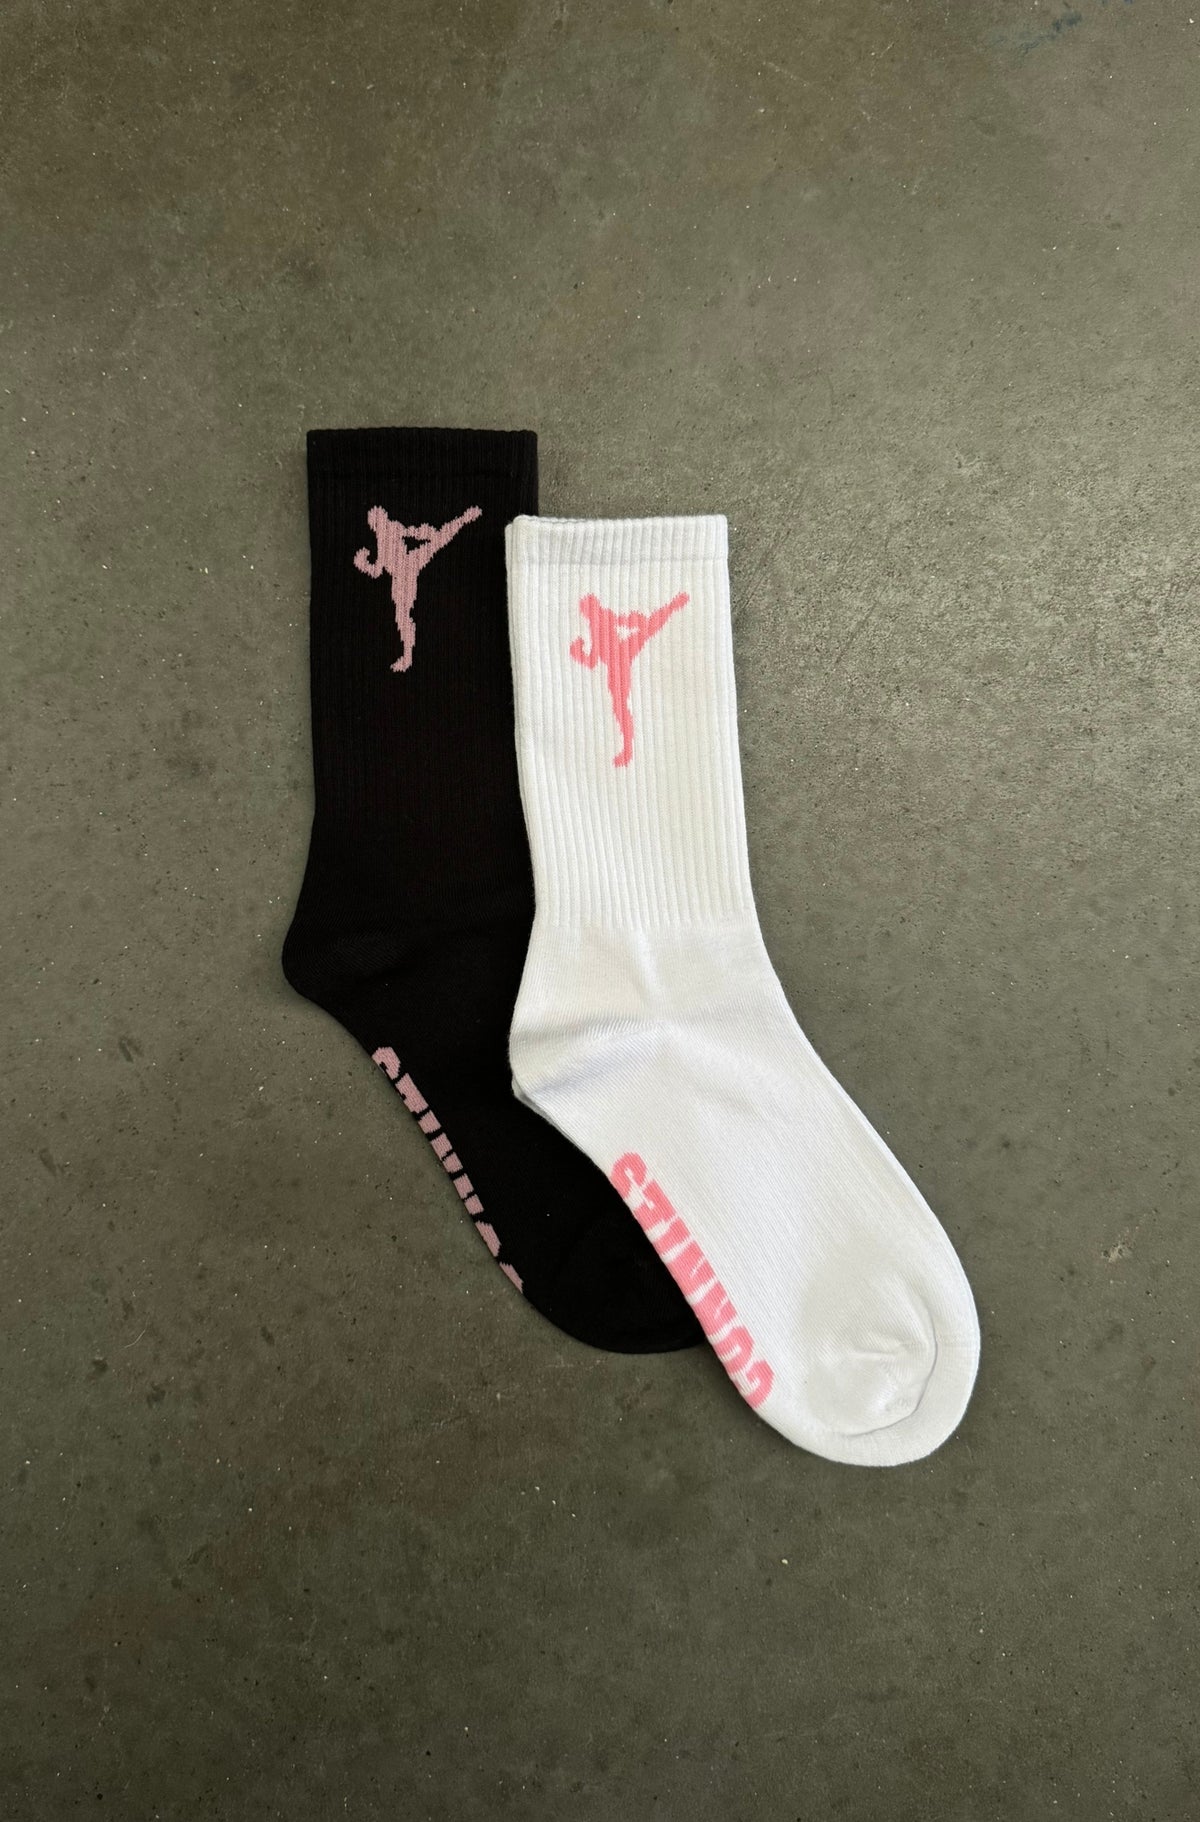 Cunnies Spin Kick Crew Socks - Candy